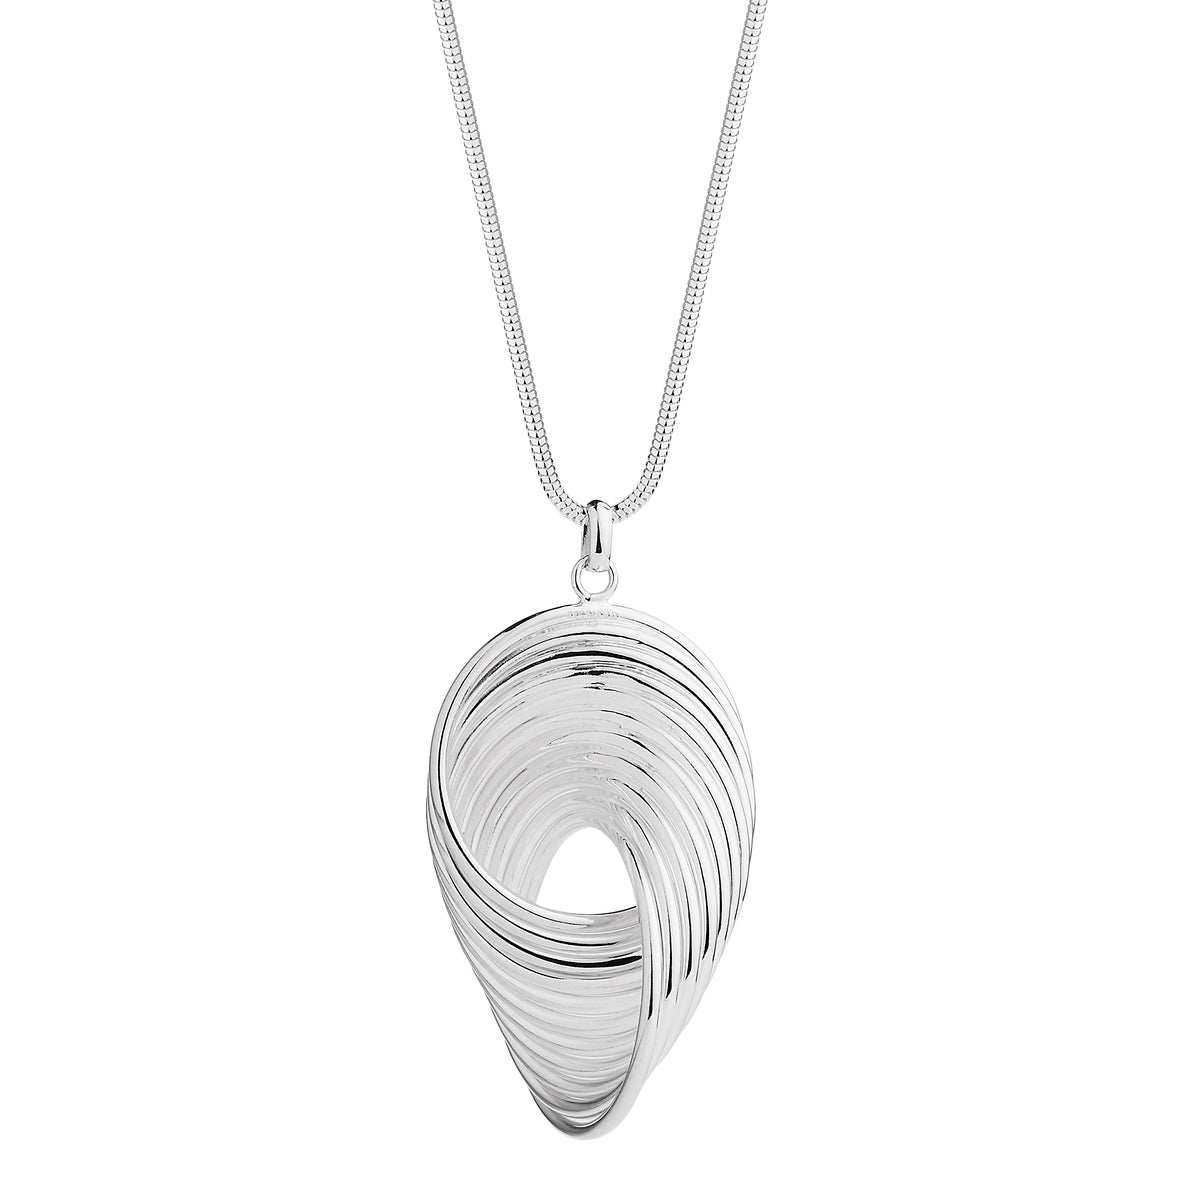 Sterling silver multi-wire, infinity pendant on silver snake chain